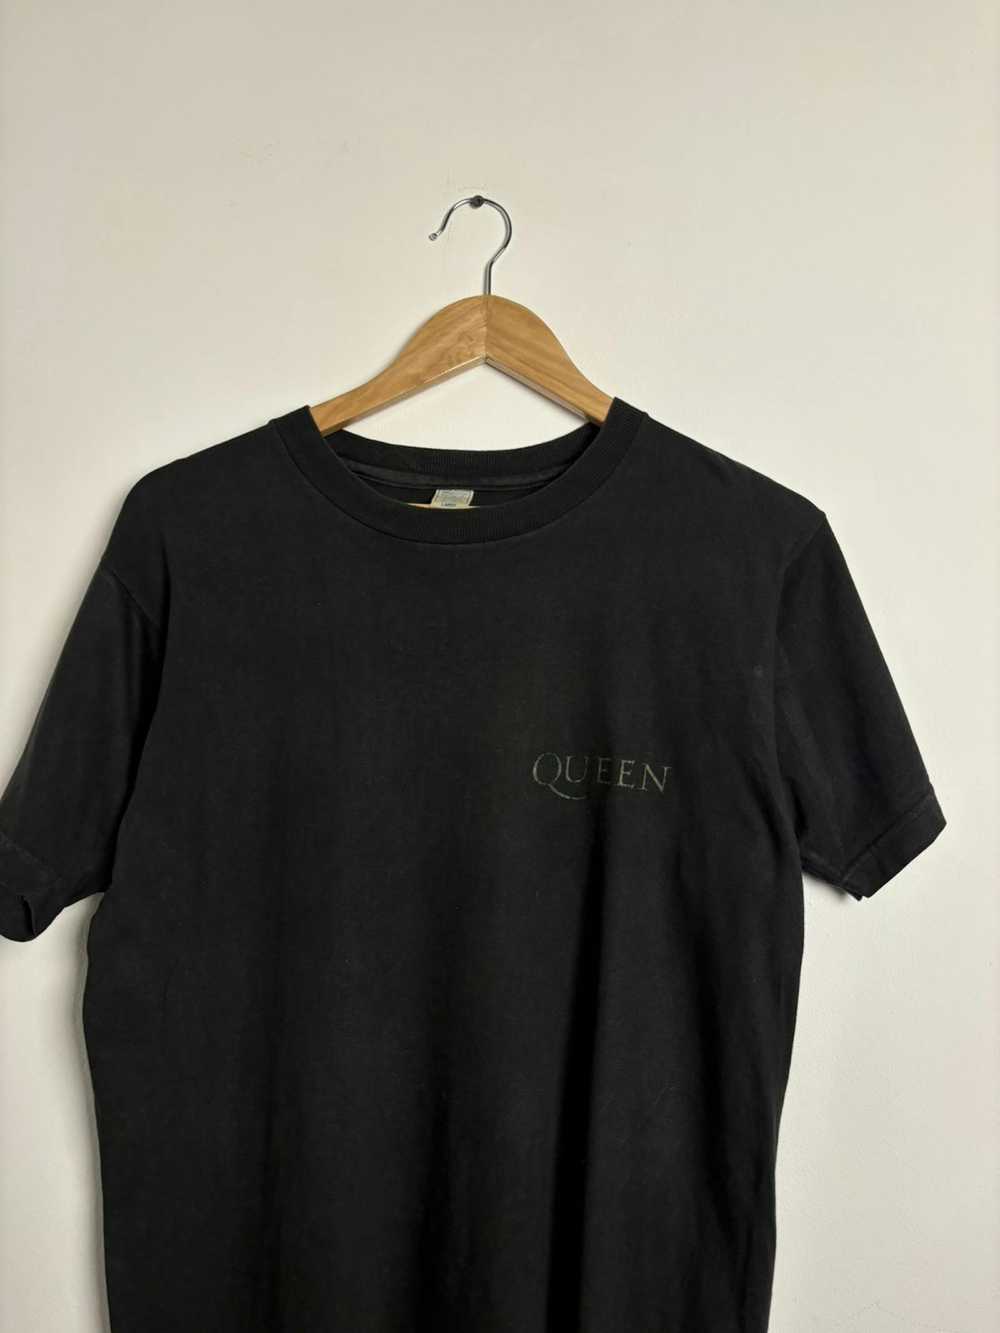 Band Tees × Queen Tour Tee × Rock Tees Vintage 90… - image 2